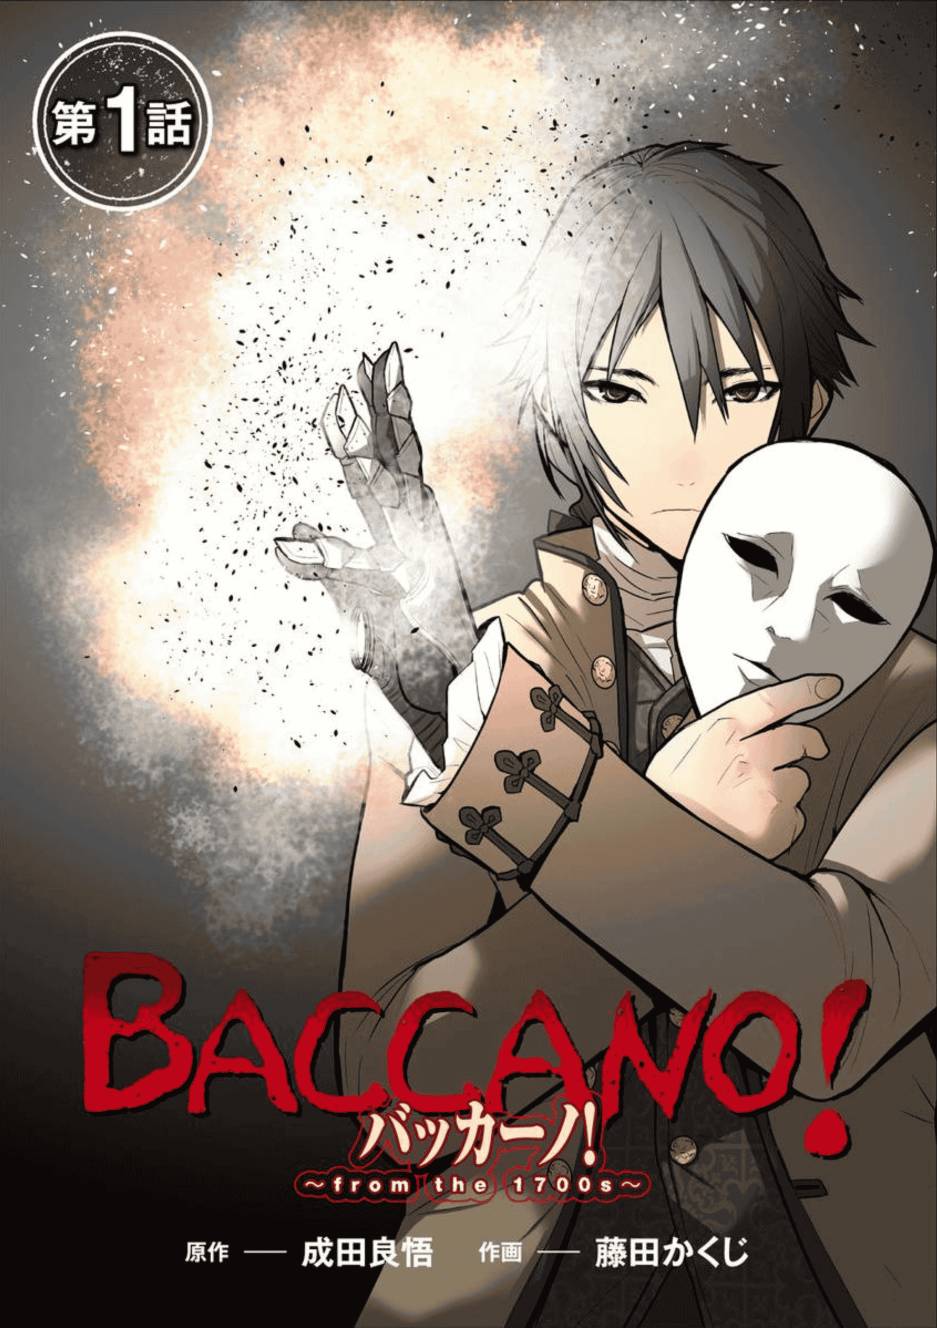 BACCANO! 永生之酒！~from the 1700s~ - 第01話 - 4